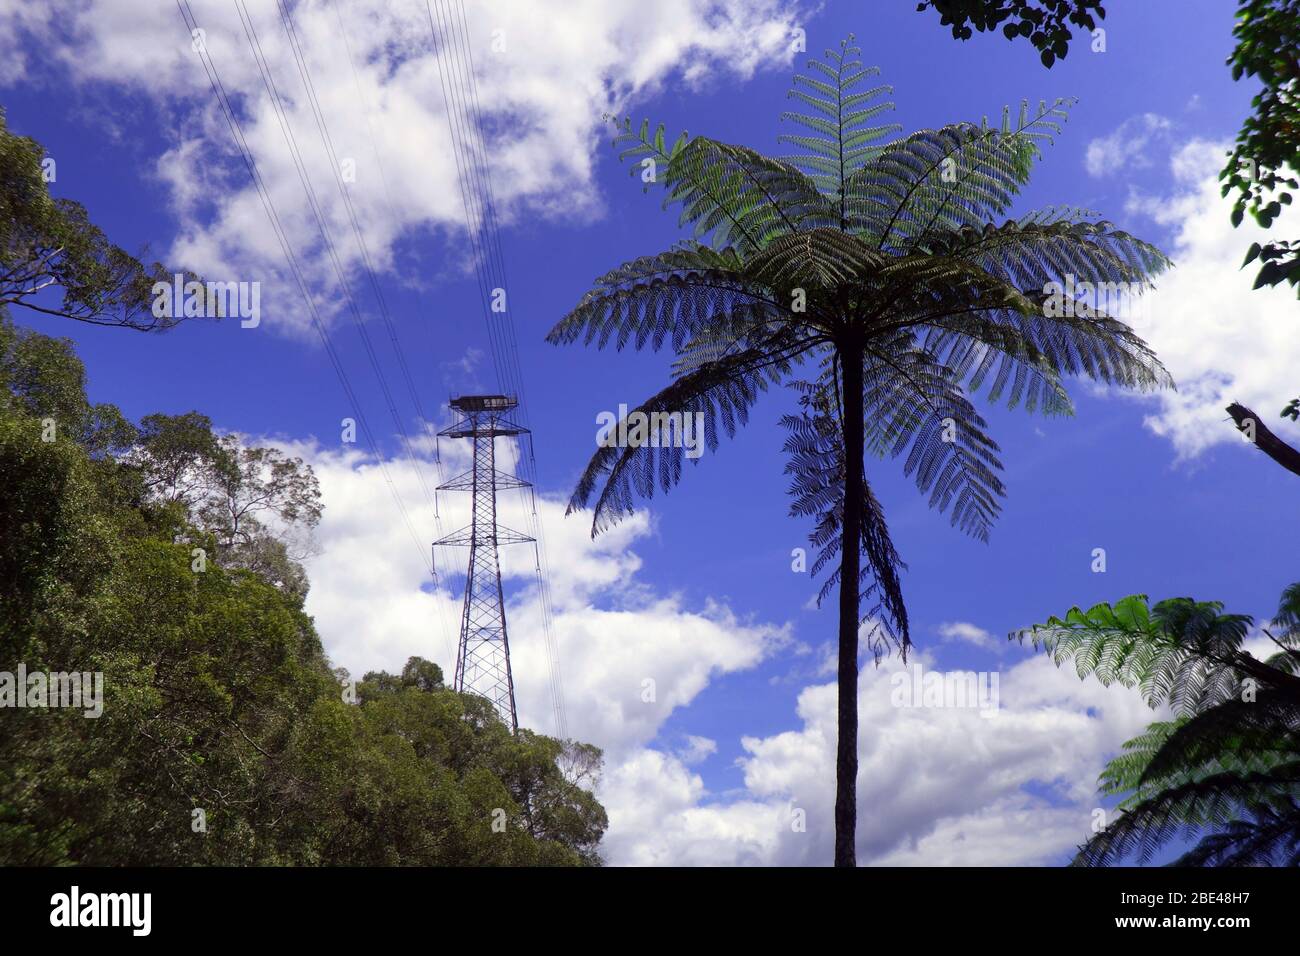 Helicopter landing pad on top of electrical pylon transmitting hydropower over tropical rainforest, Lake Morris, Copperlode Dam, Cairns, Queensland, A Stock Photo